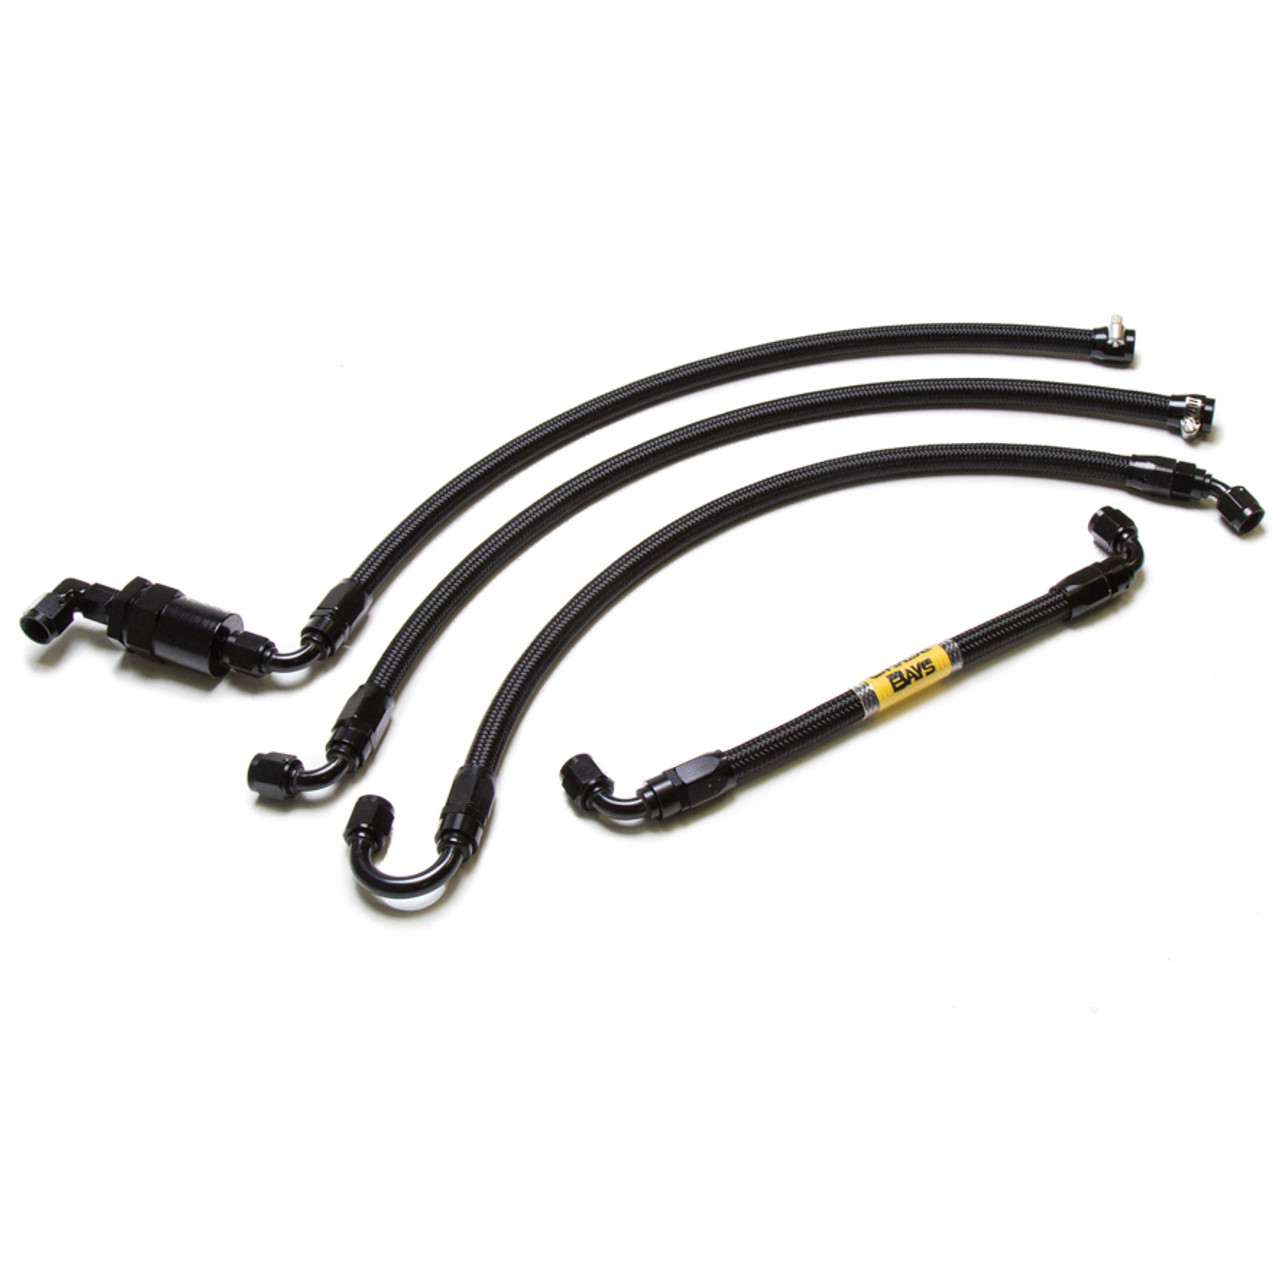 Chase Bays AN Fuel Line Kit - Nissan 240SX with Chevrolet LSx